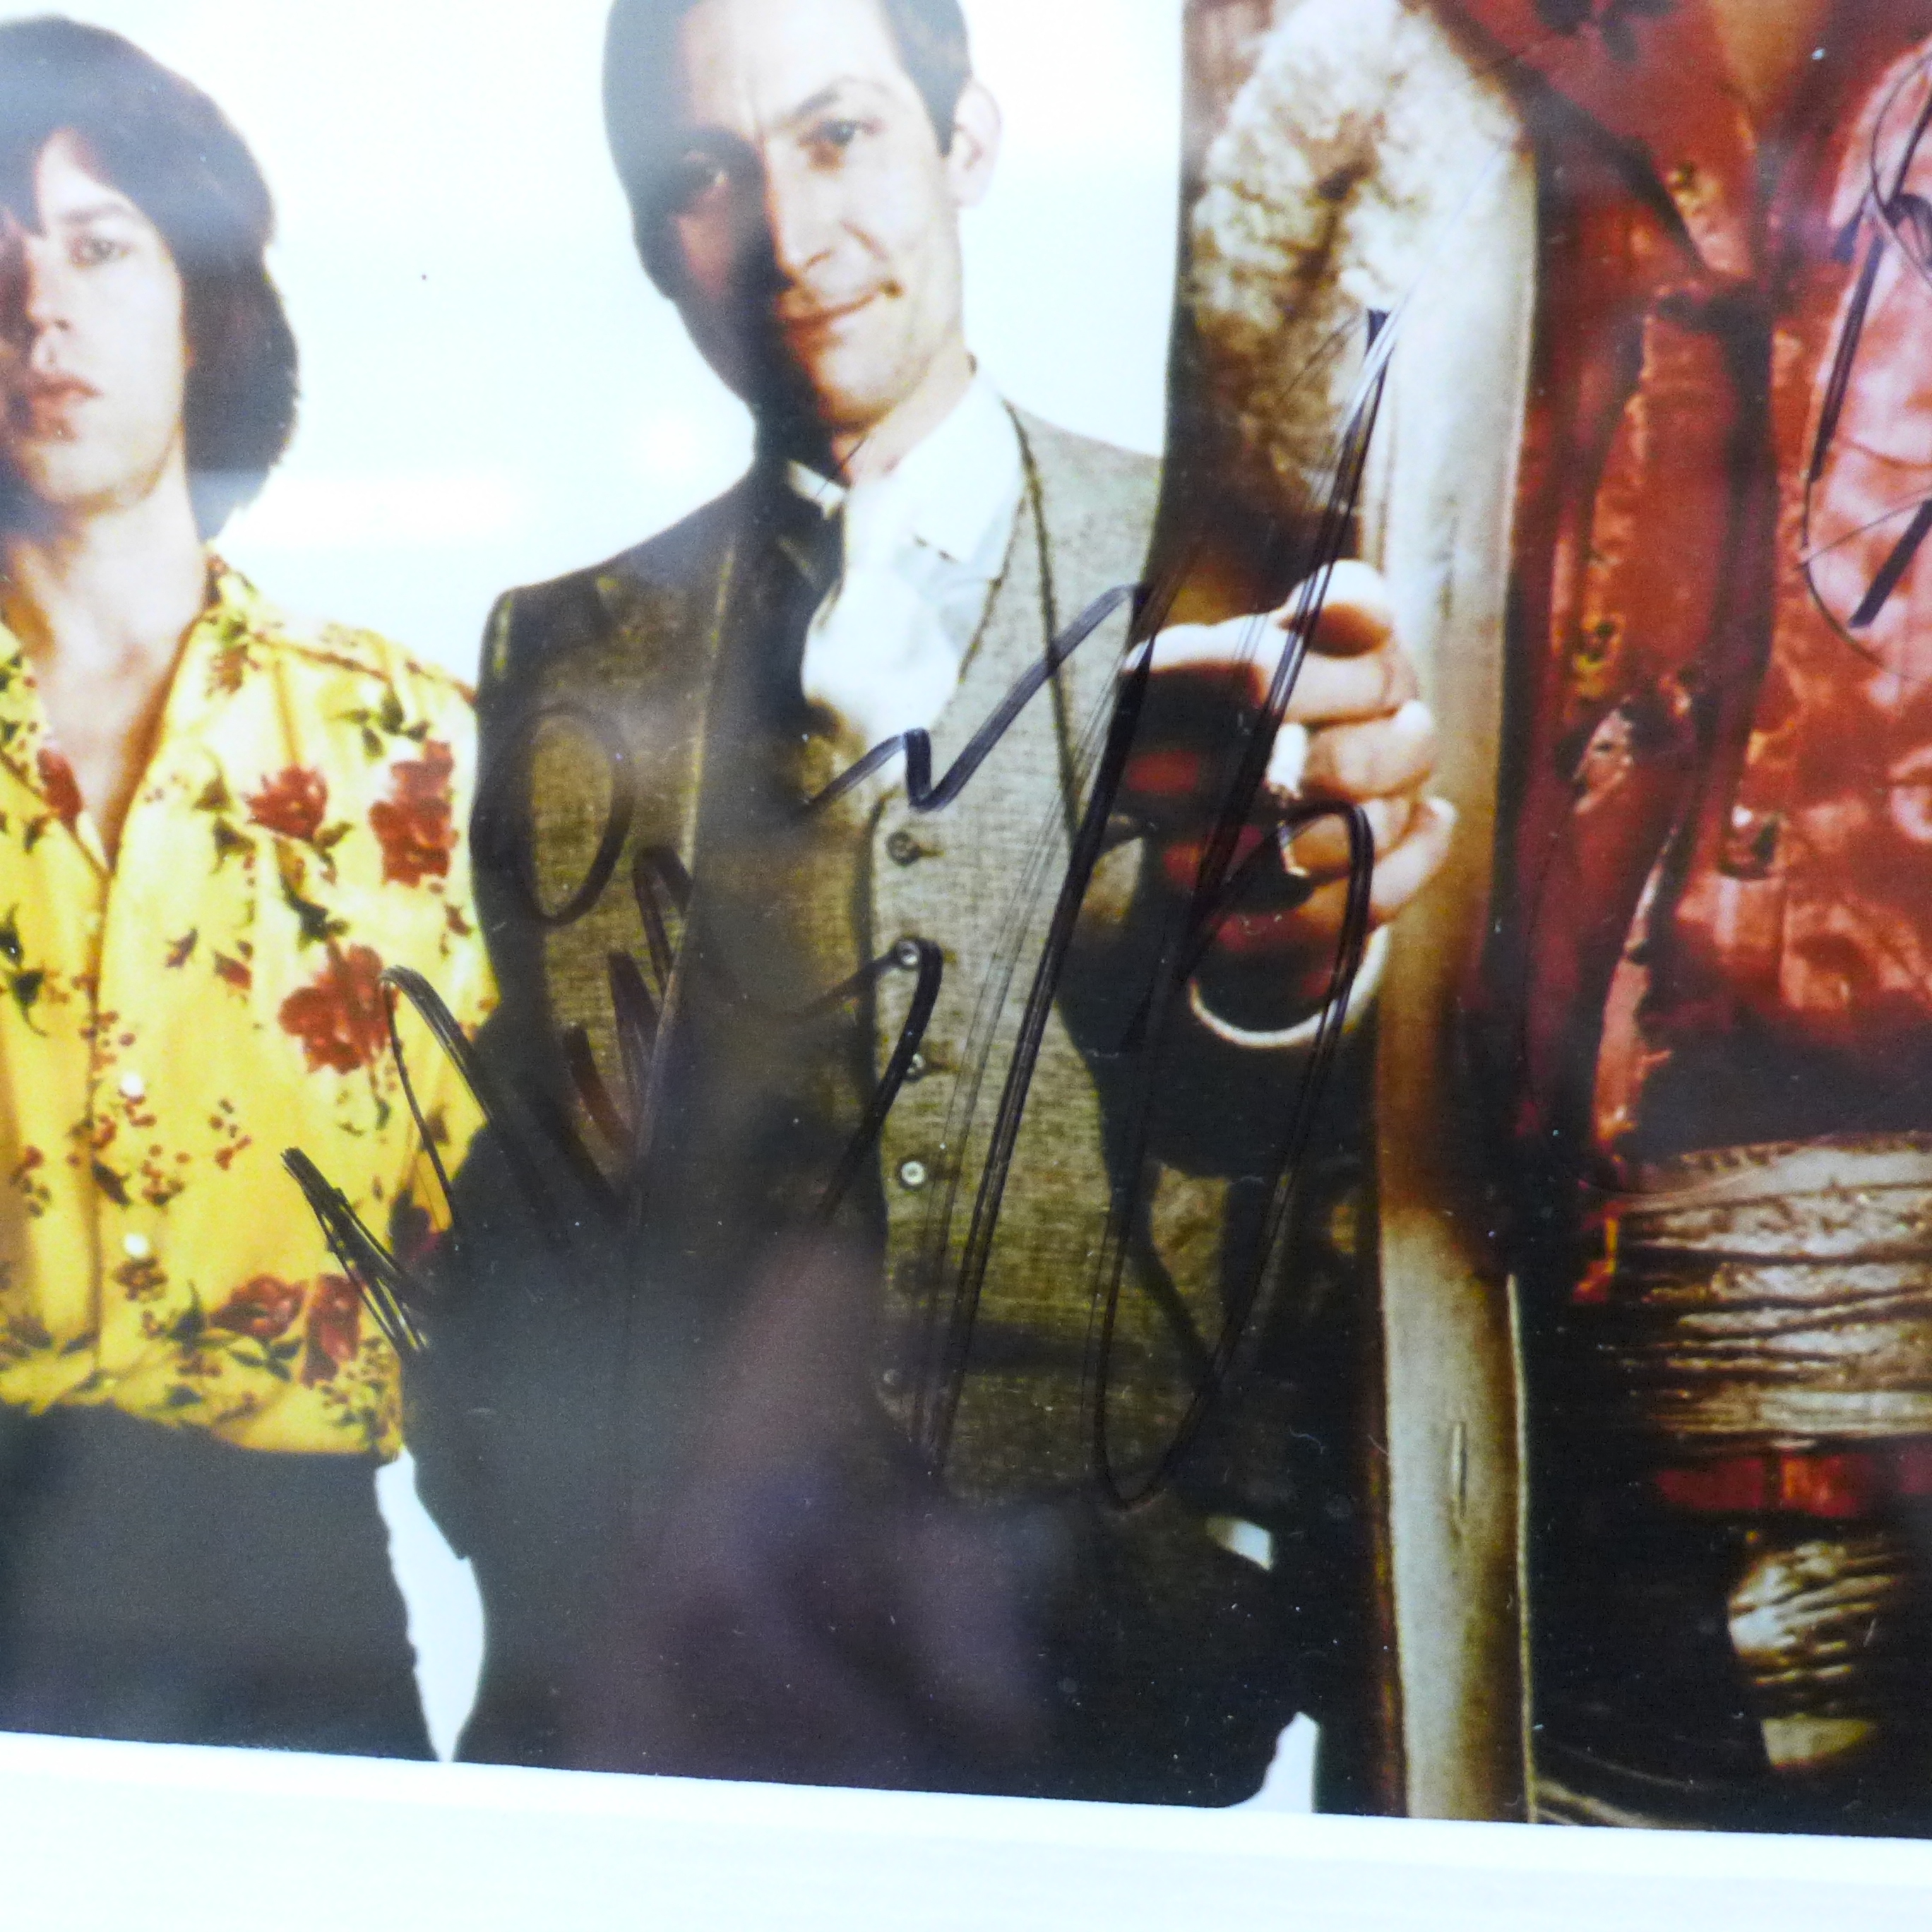 Rolling Stones; Mick Jagger, Ronnie Wood, Keith Richards and Charlie Watts signed photograph with - Image 4 of 5